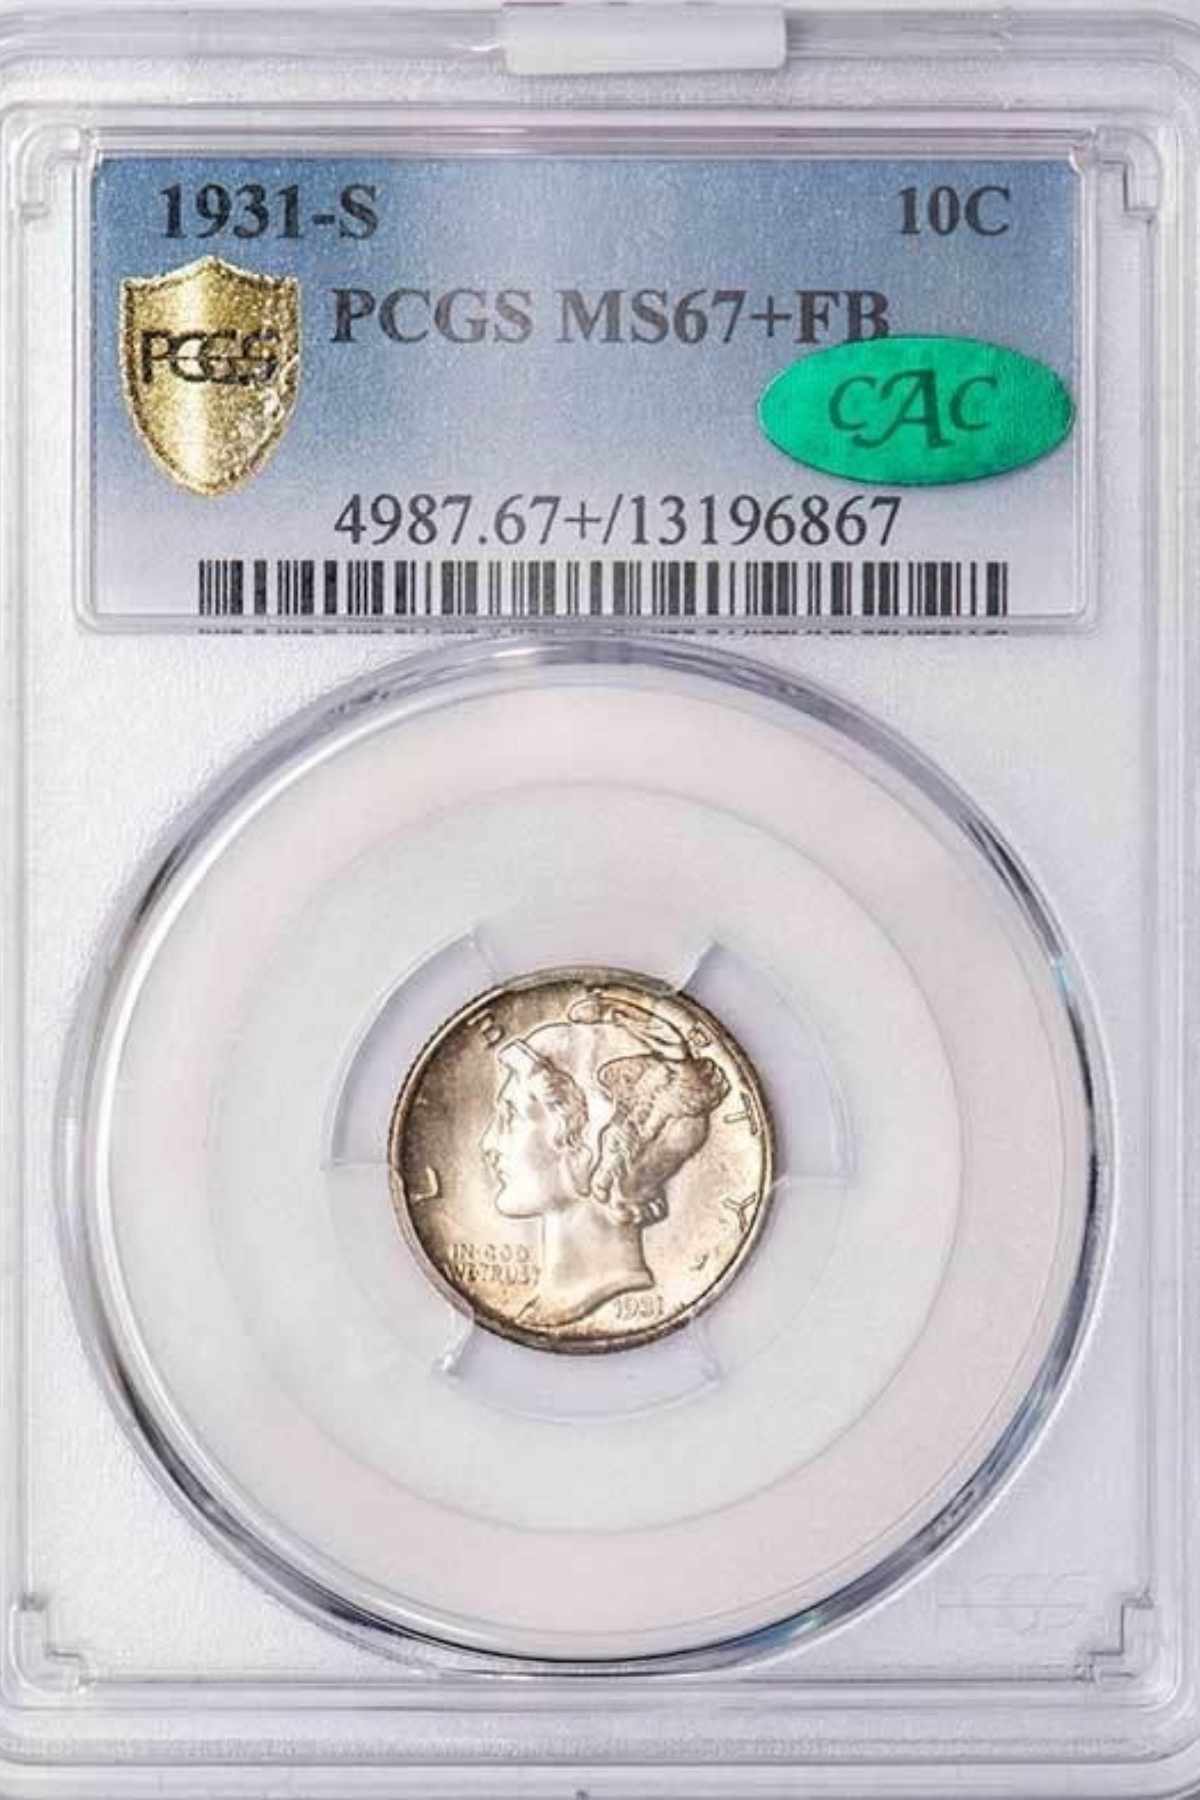 1931 S Mercury Dime sold for 270250